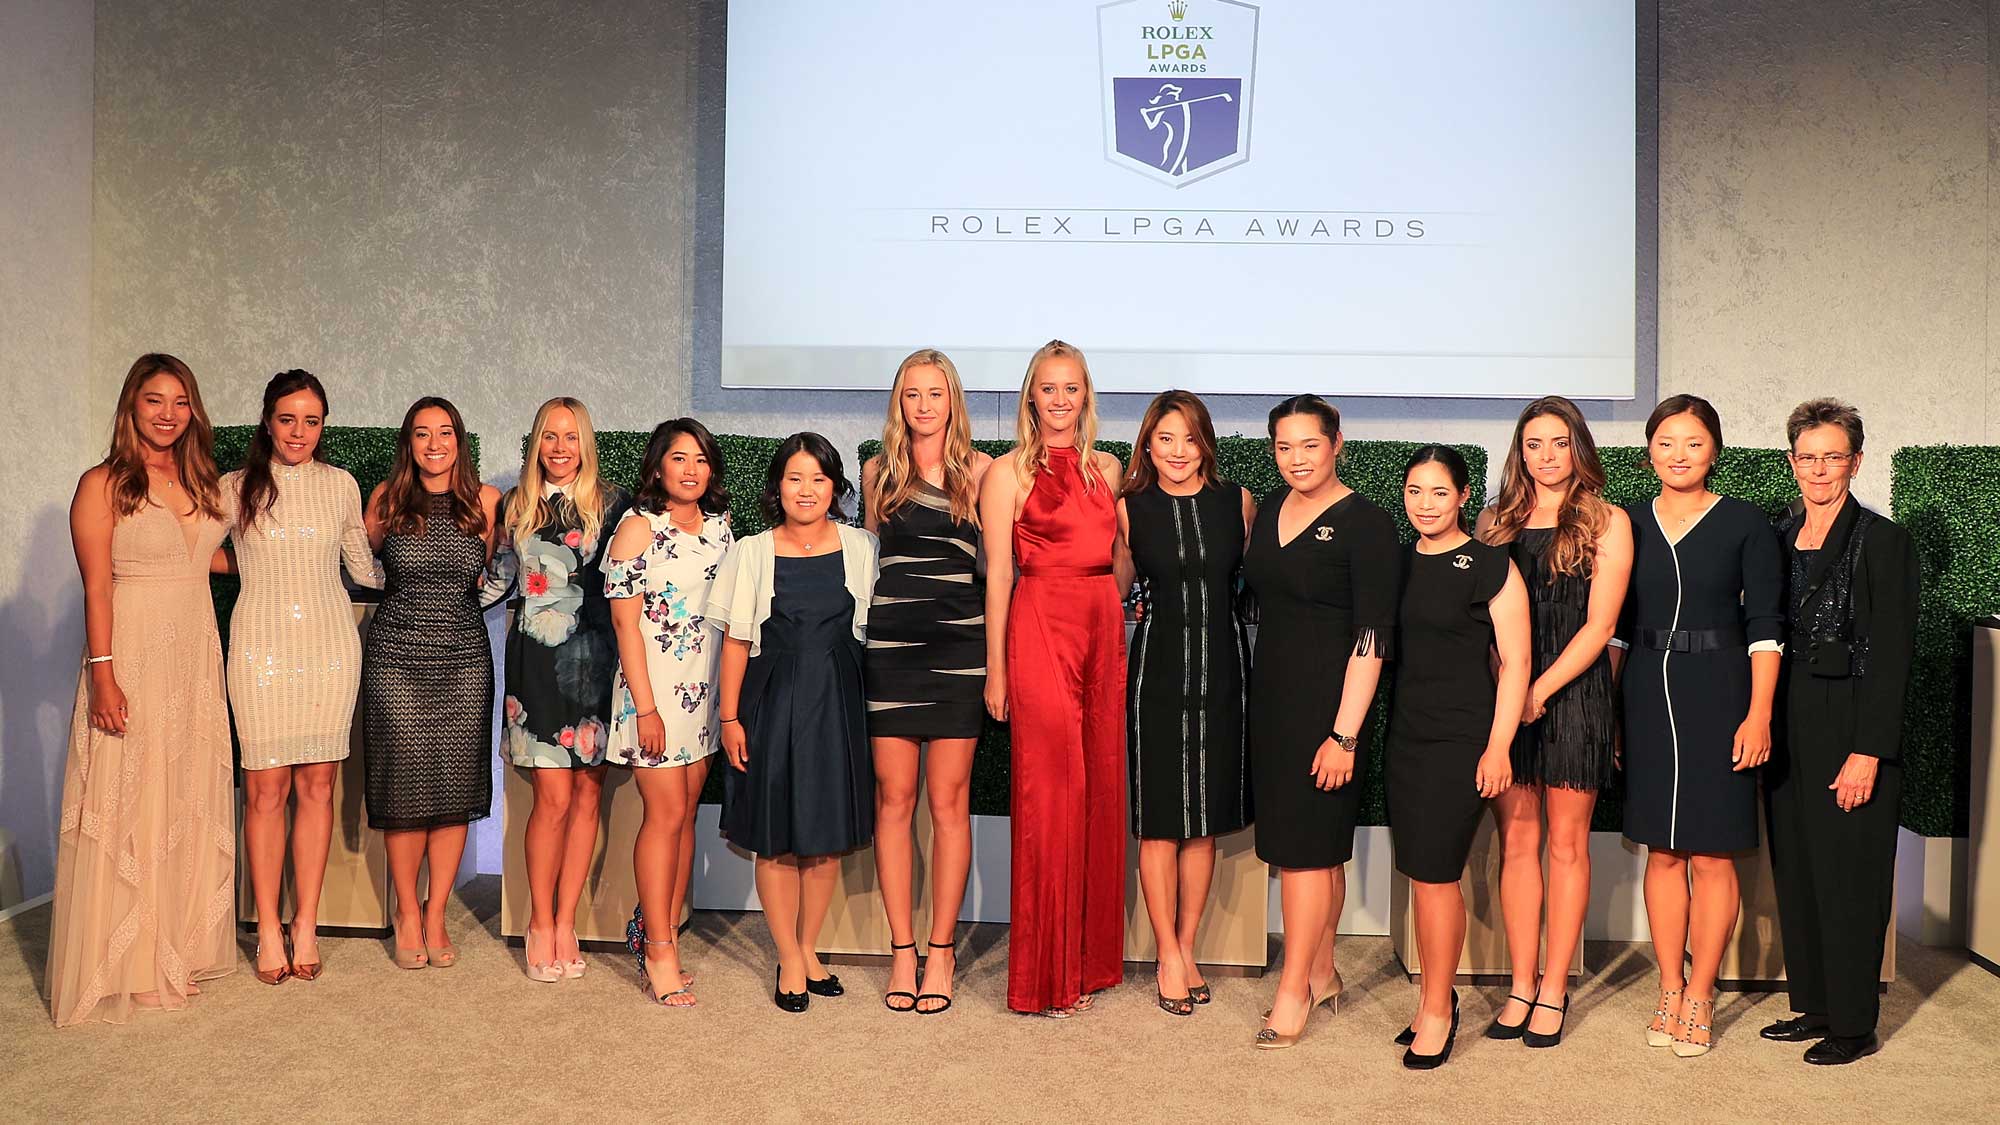 The Rolex Award winners pose for a group photo during the LPGA Rolex Players Awards at the Ritz-Carlton Golf Resort